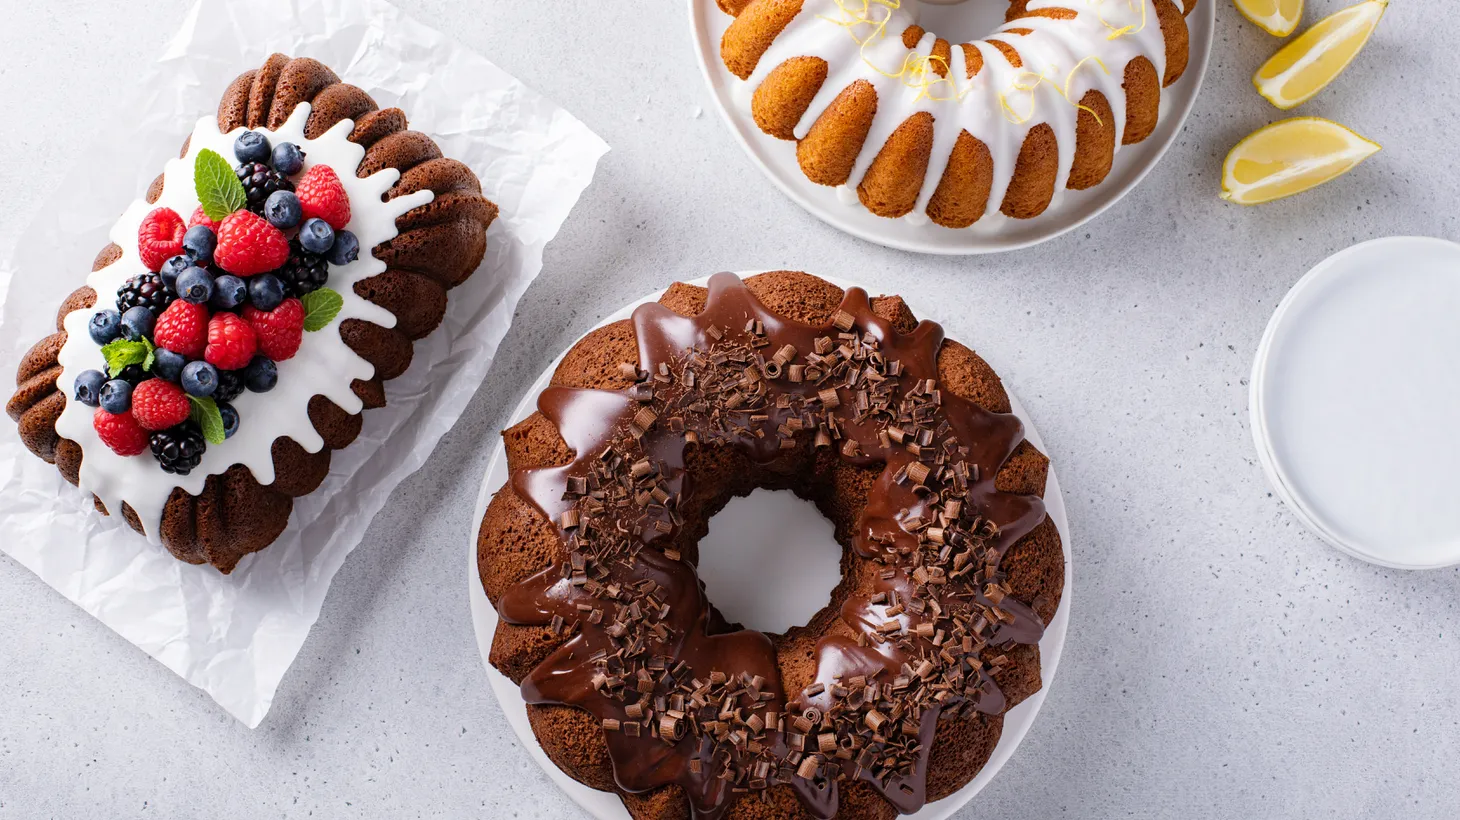 22 of Good Food's best holiday cake recipes | KCRW